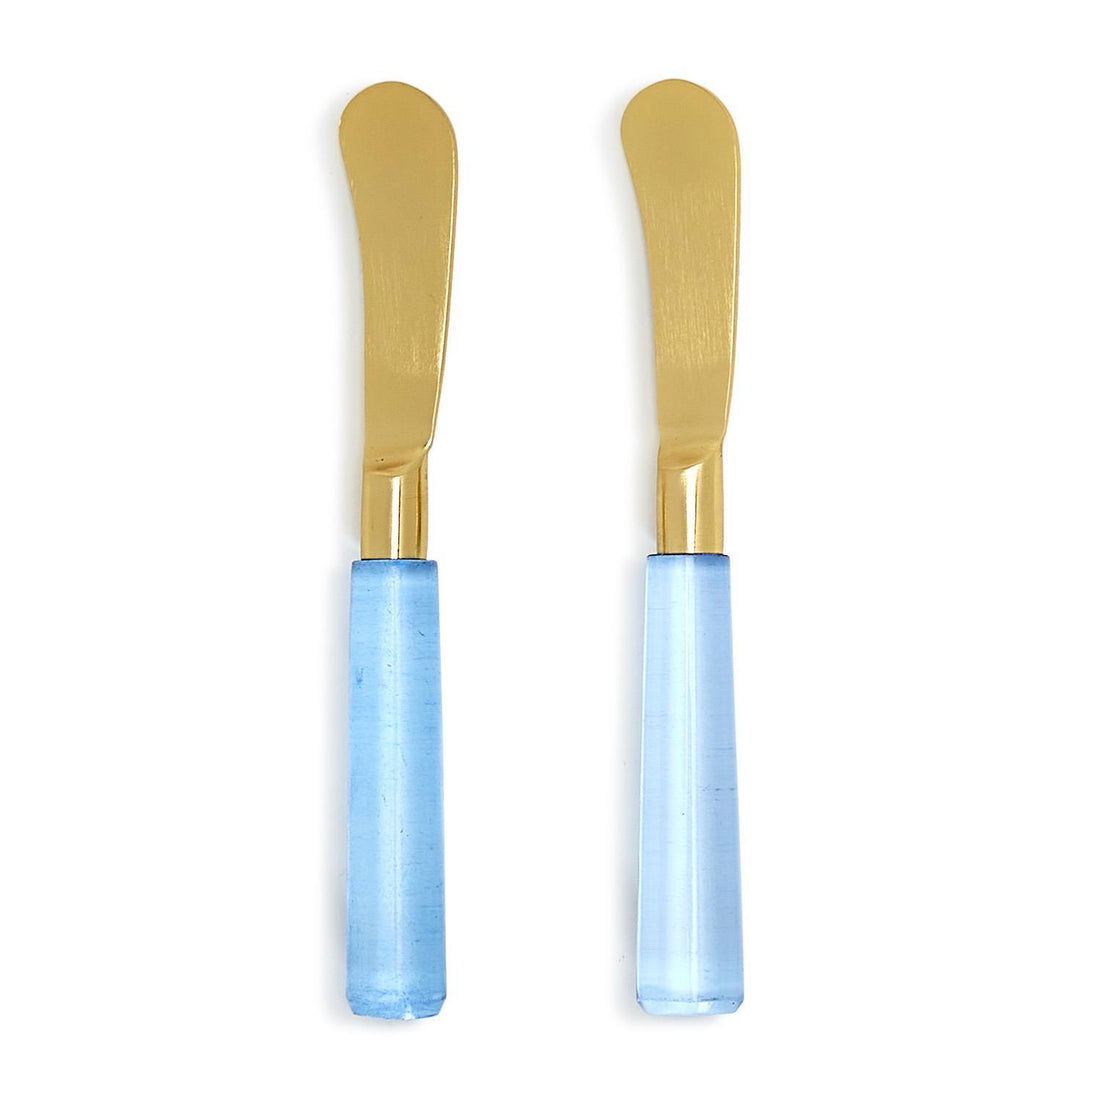 Gold and Blue Spreaders